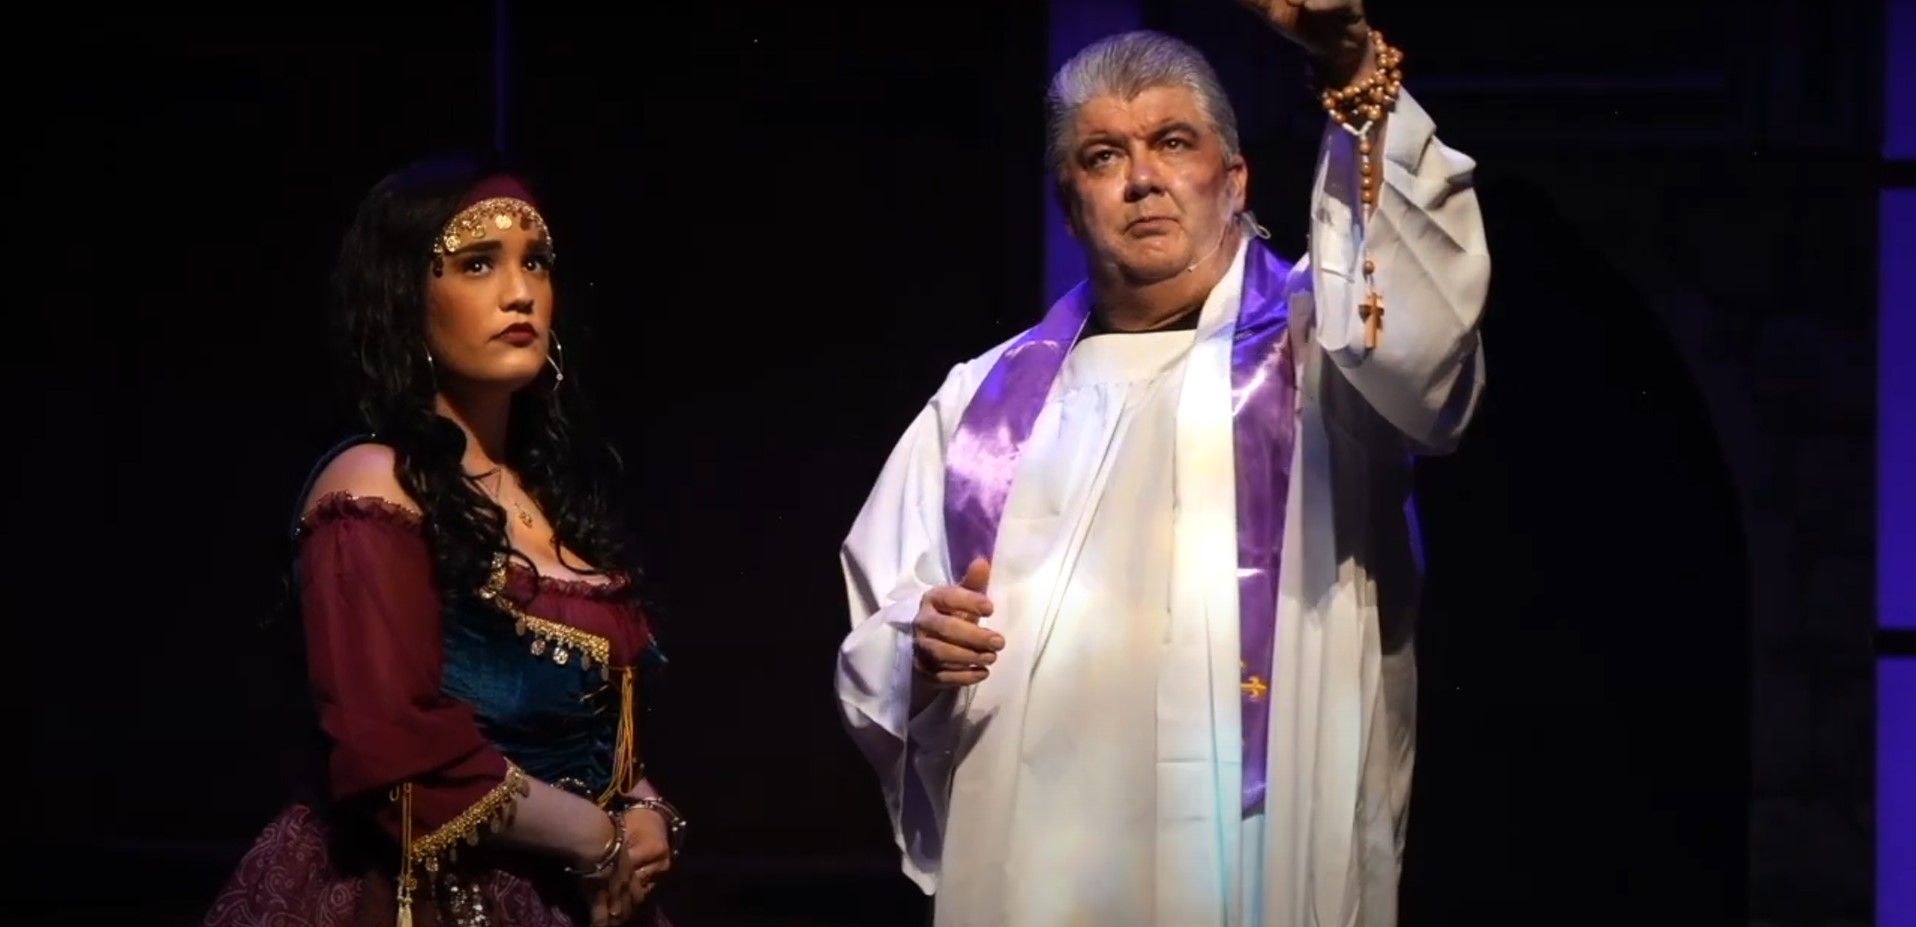 Catherine as Esmeralda in The Hunchback of Notre Dame with Seminole Theatre. For her performance, she was nominated for 2022 BroadwayWorld Miami Metro Awards as Best Performer in a Musical. Featured: John Rudolph as Dom Claude Frollo